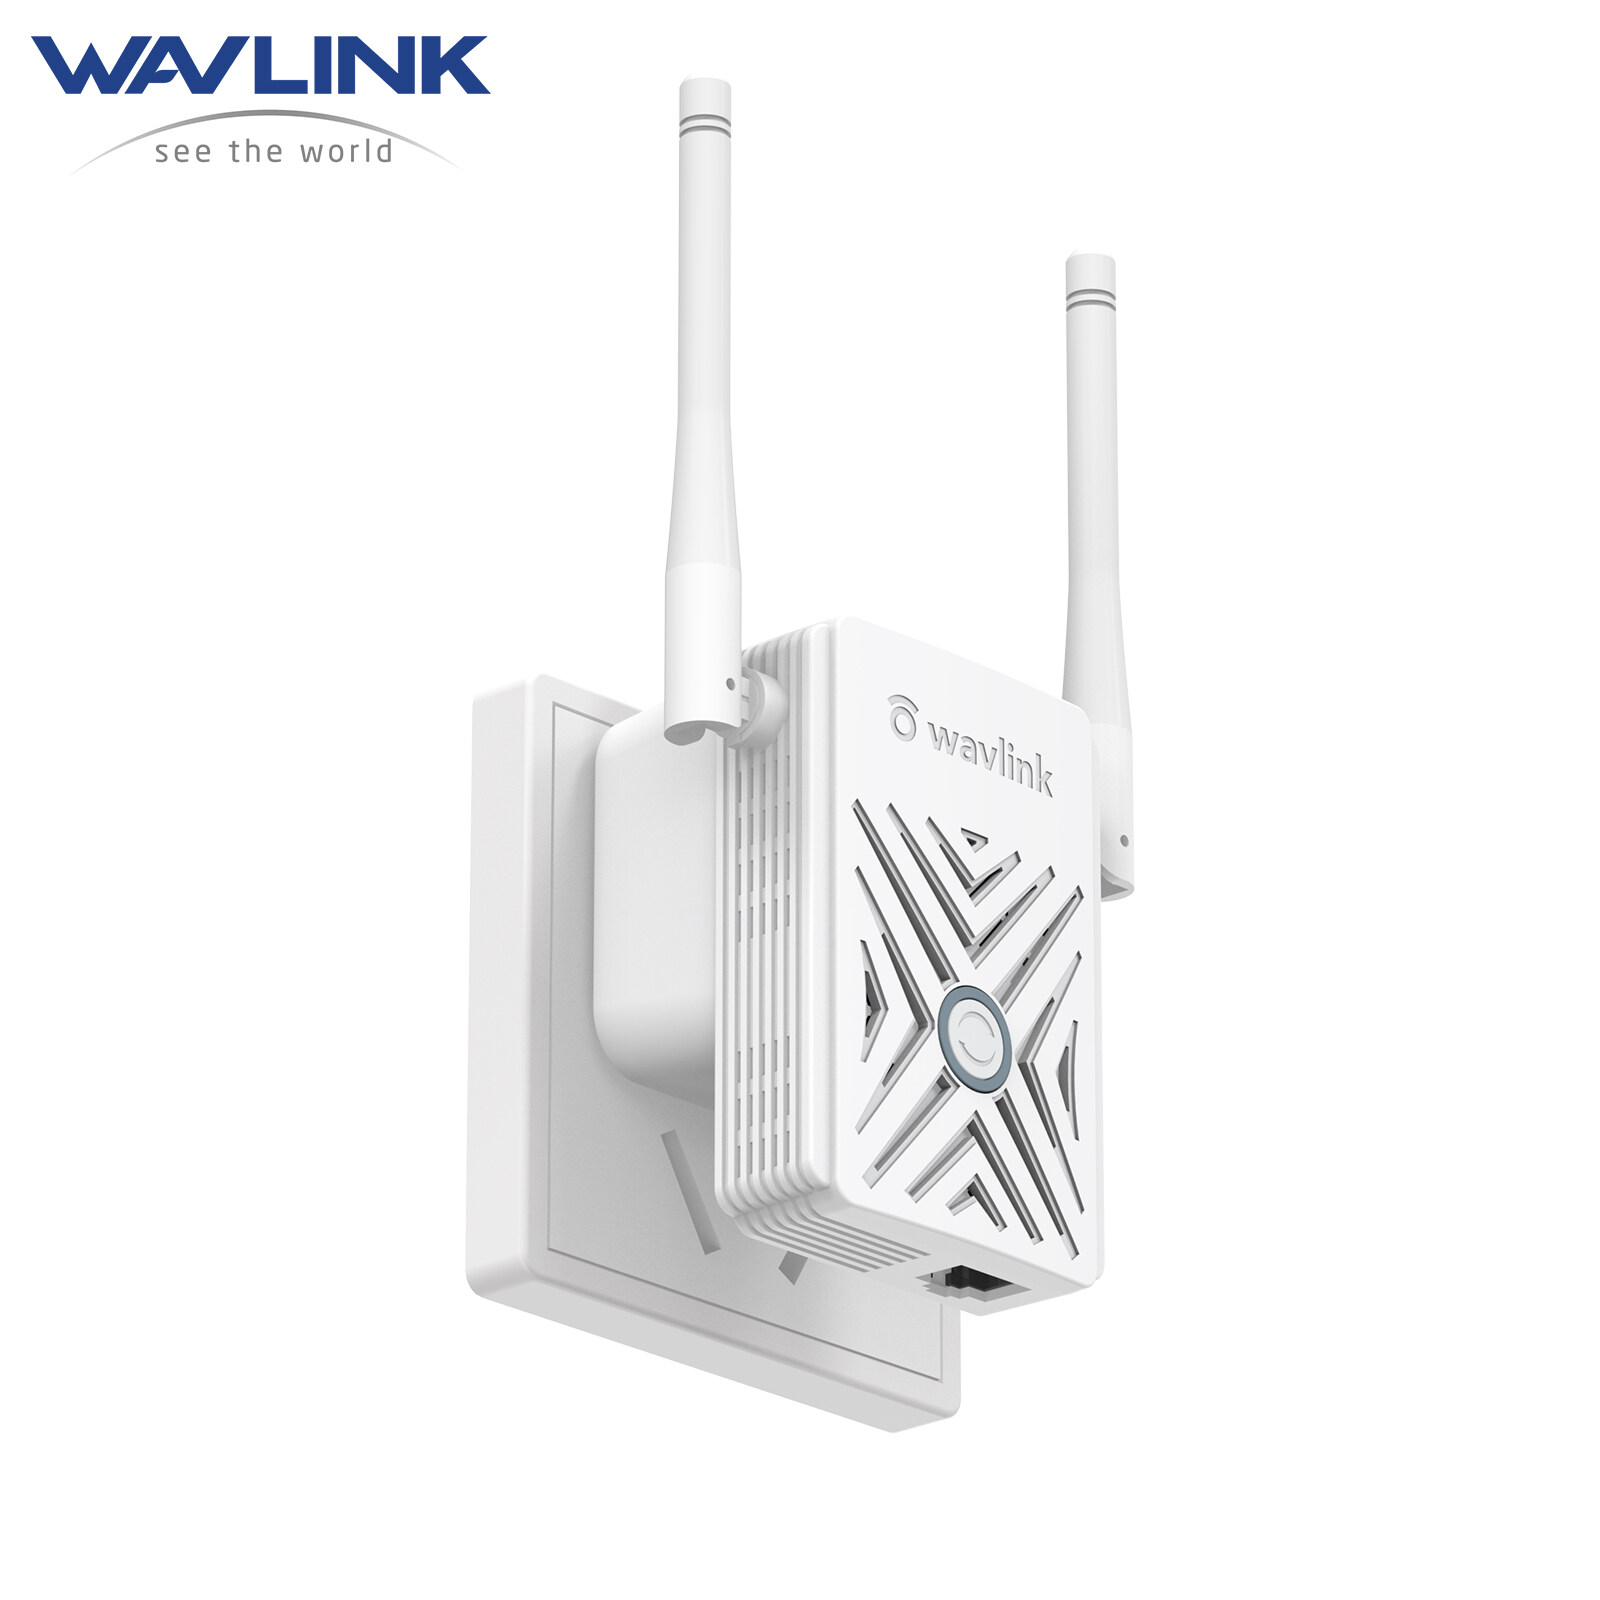 Wavlink N300 Wi-Fi Range Extender, Wireless with Ethernet Port for Home